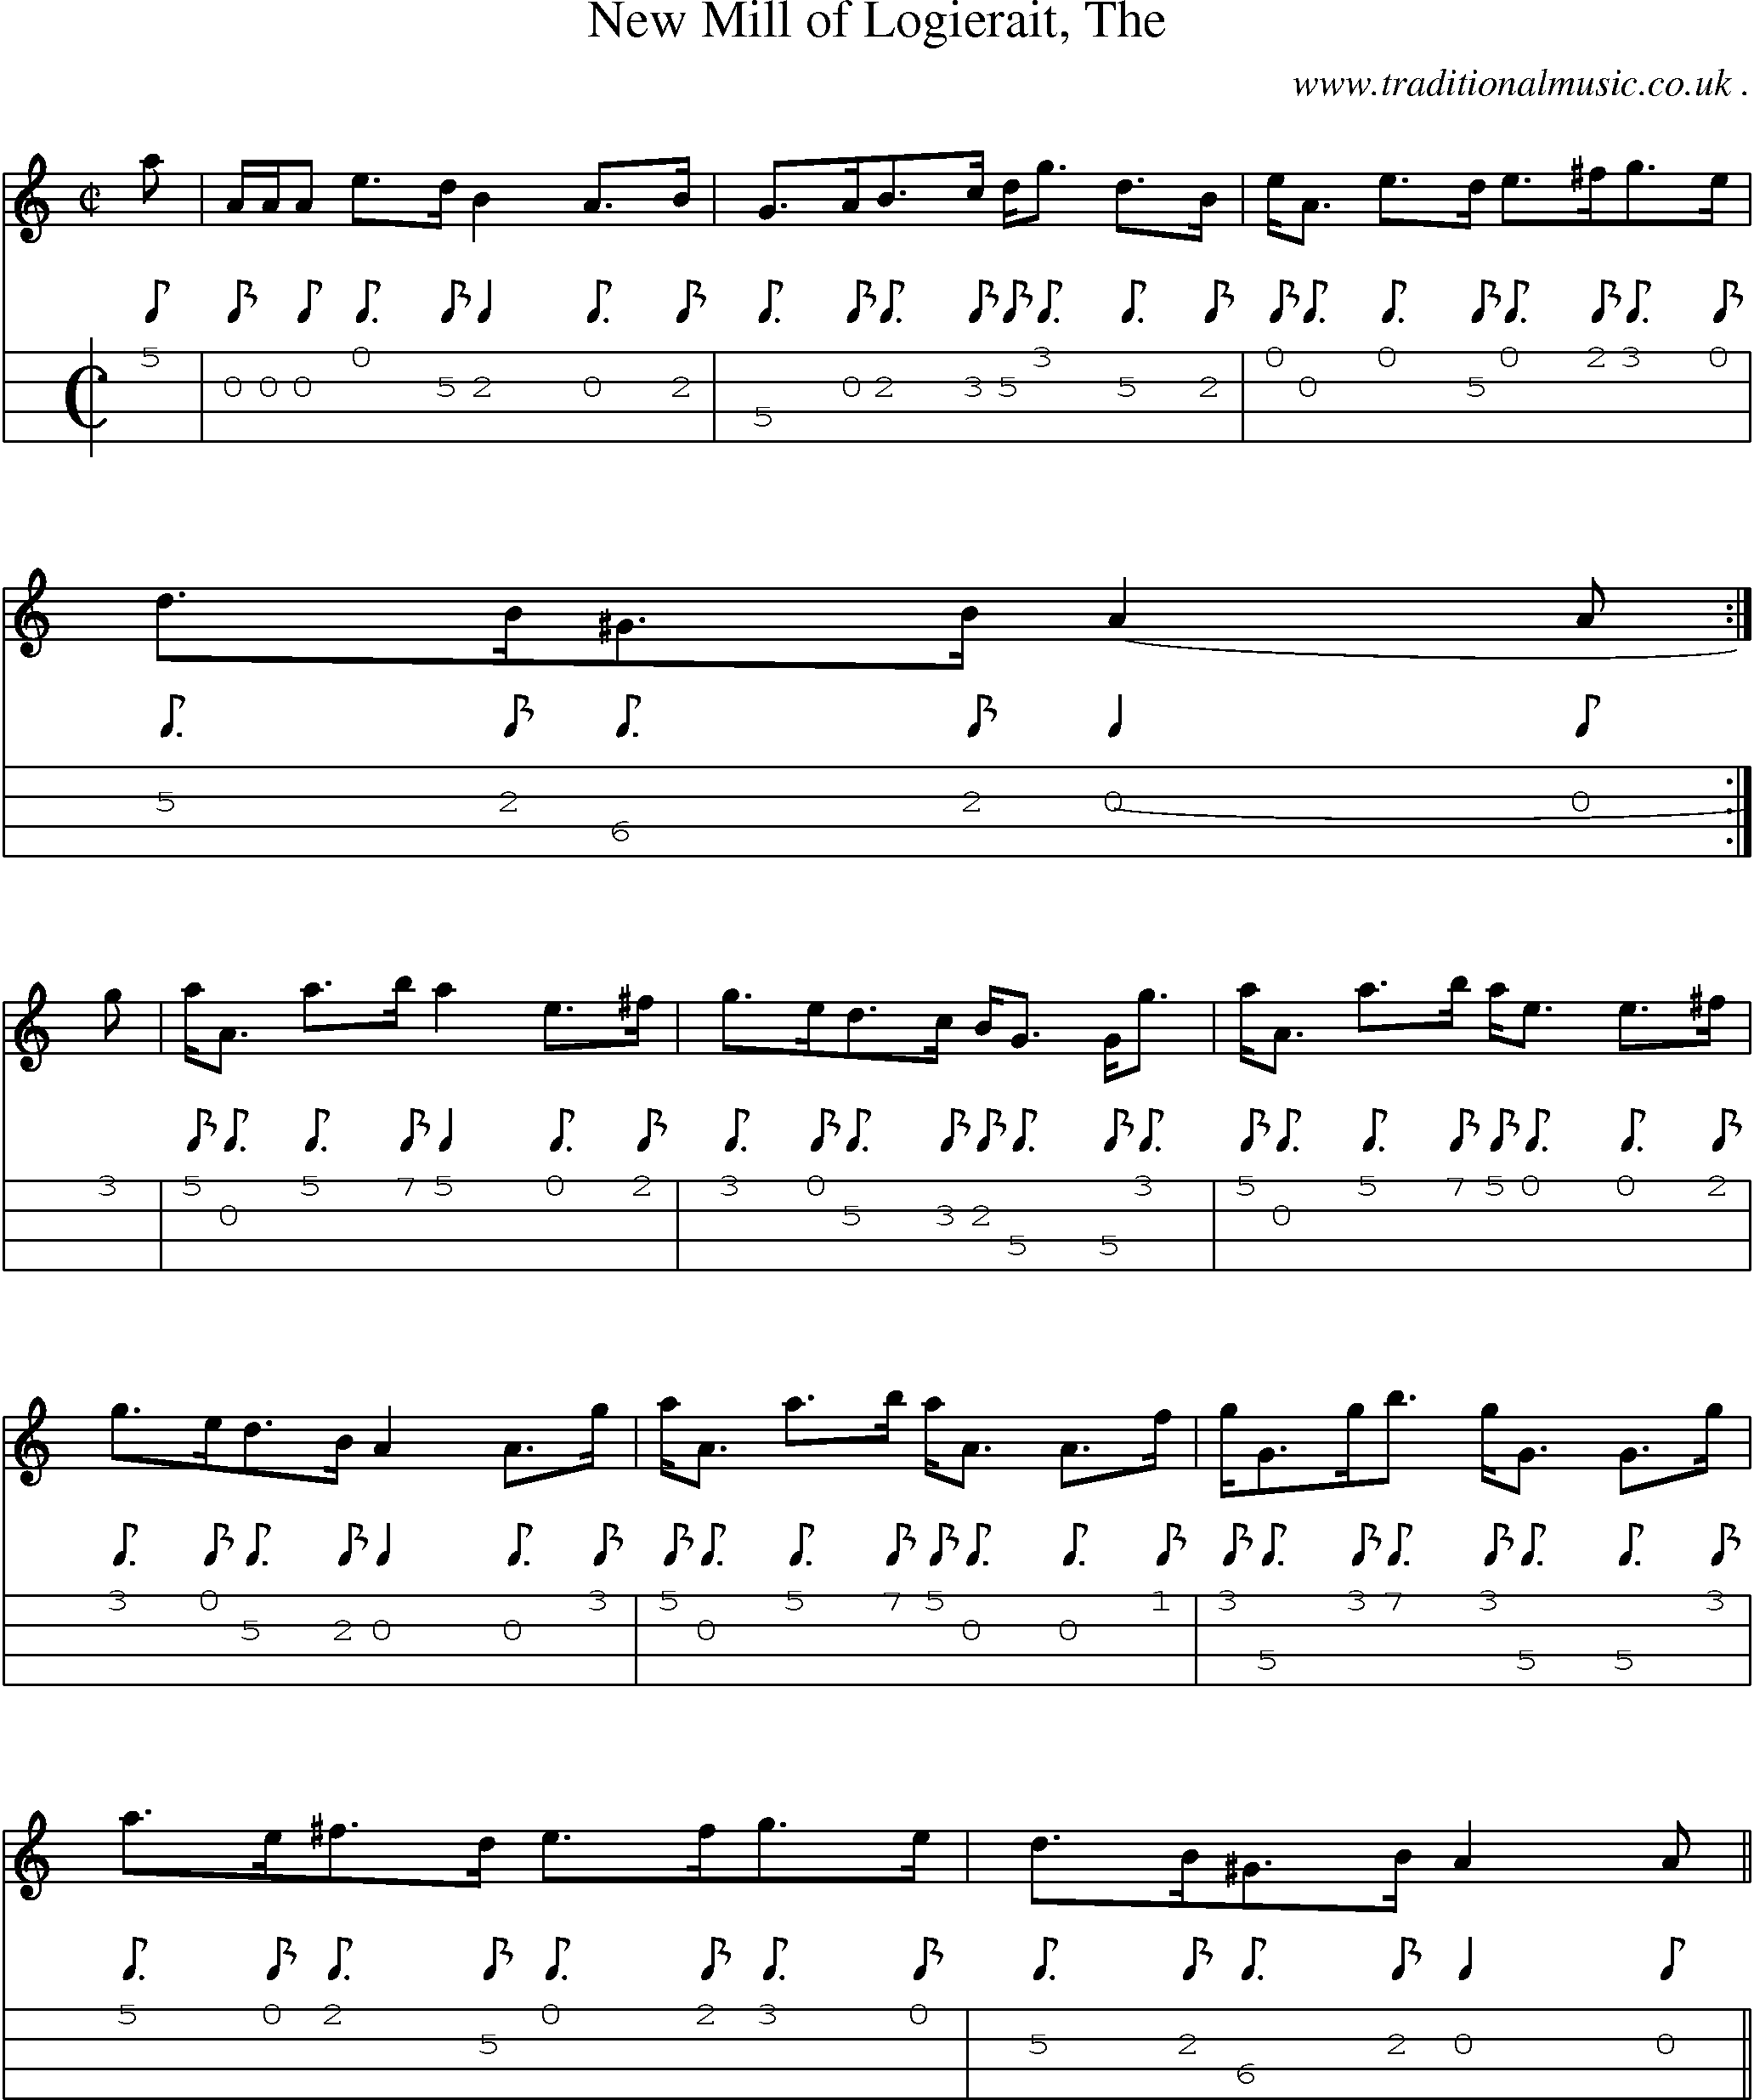 Sheet-music  score, Chords and Mandolin Tabs for New Mill Of Logierait The